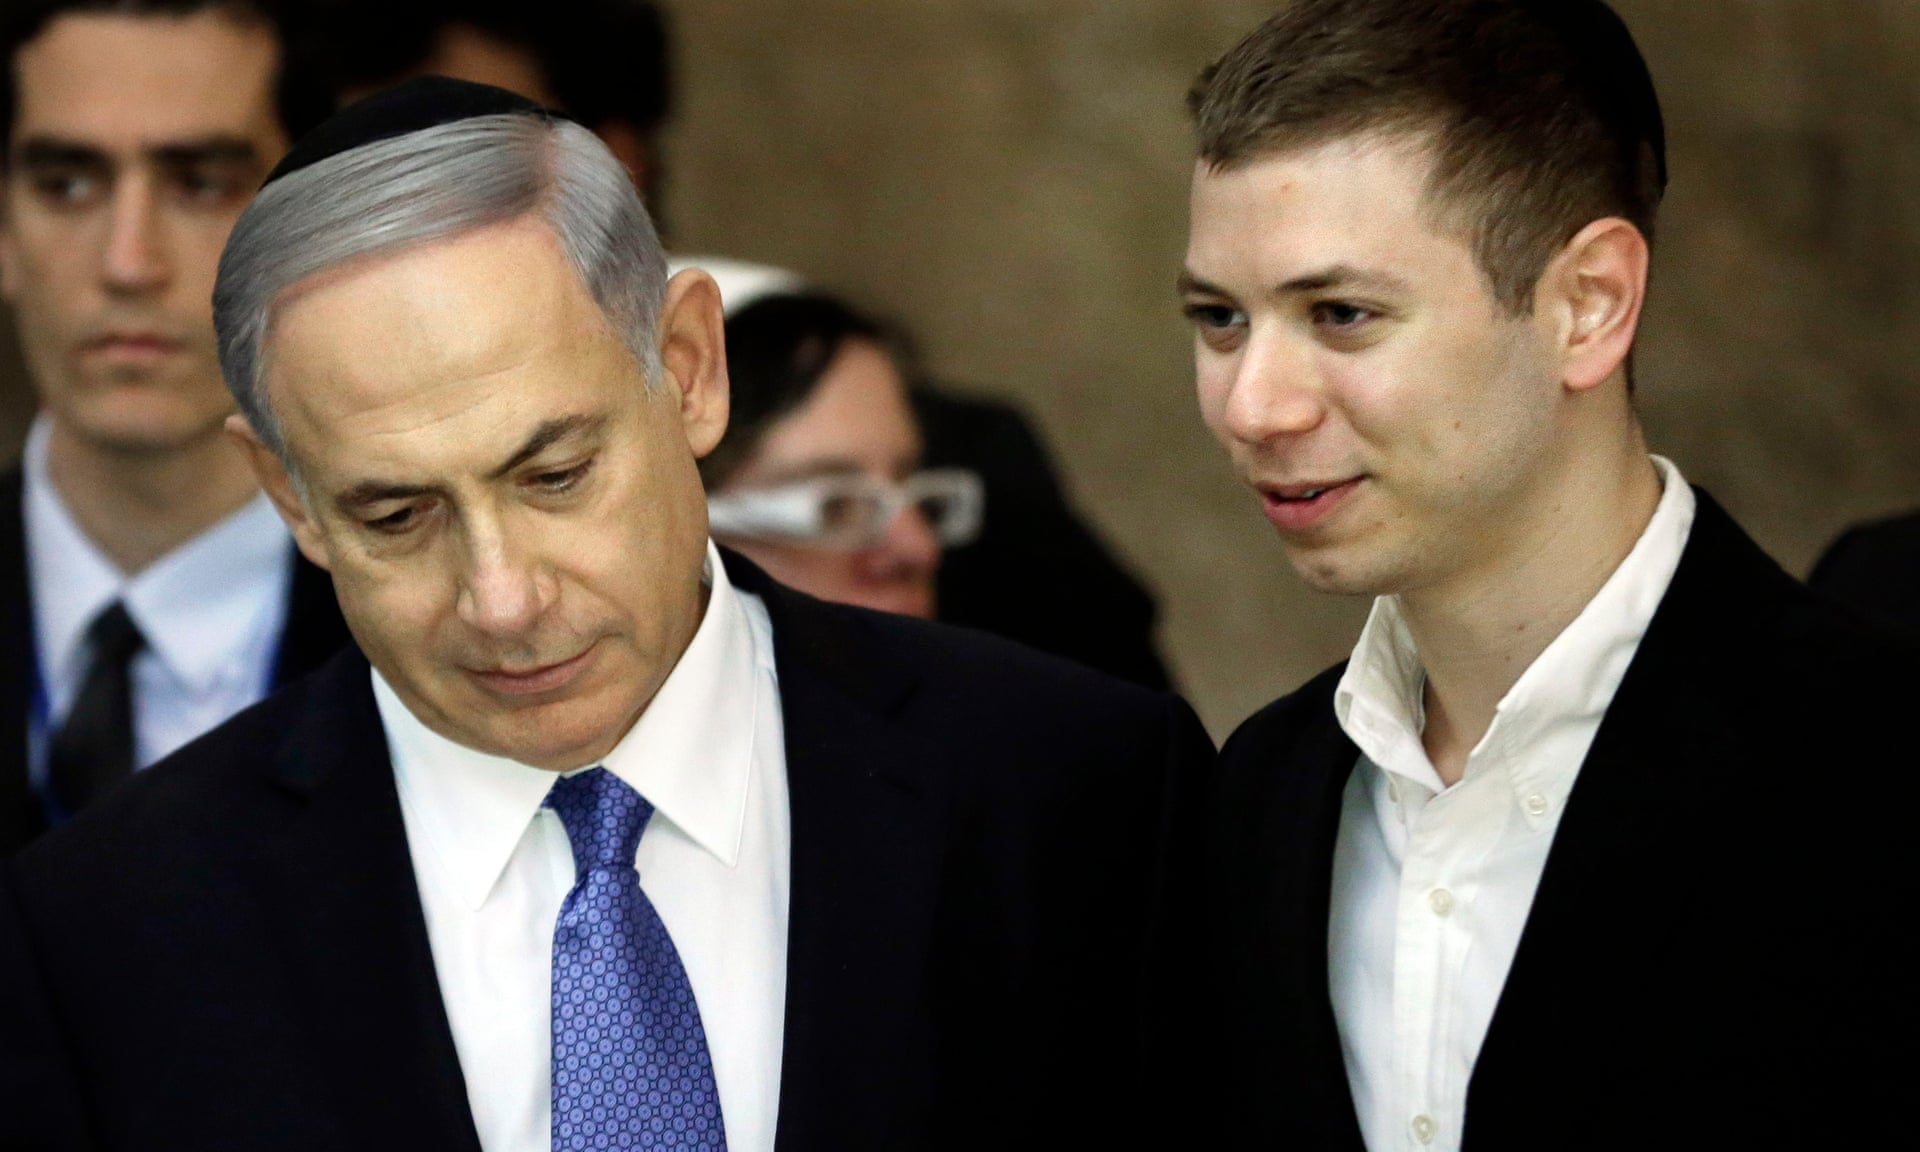 Yair Netanyahu (right) with his father in Jerusalem in 2015. Photograph: Thomas Coex/AFP/Getty Images